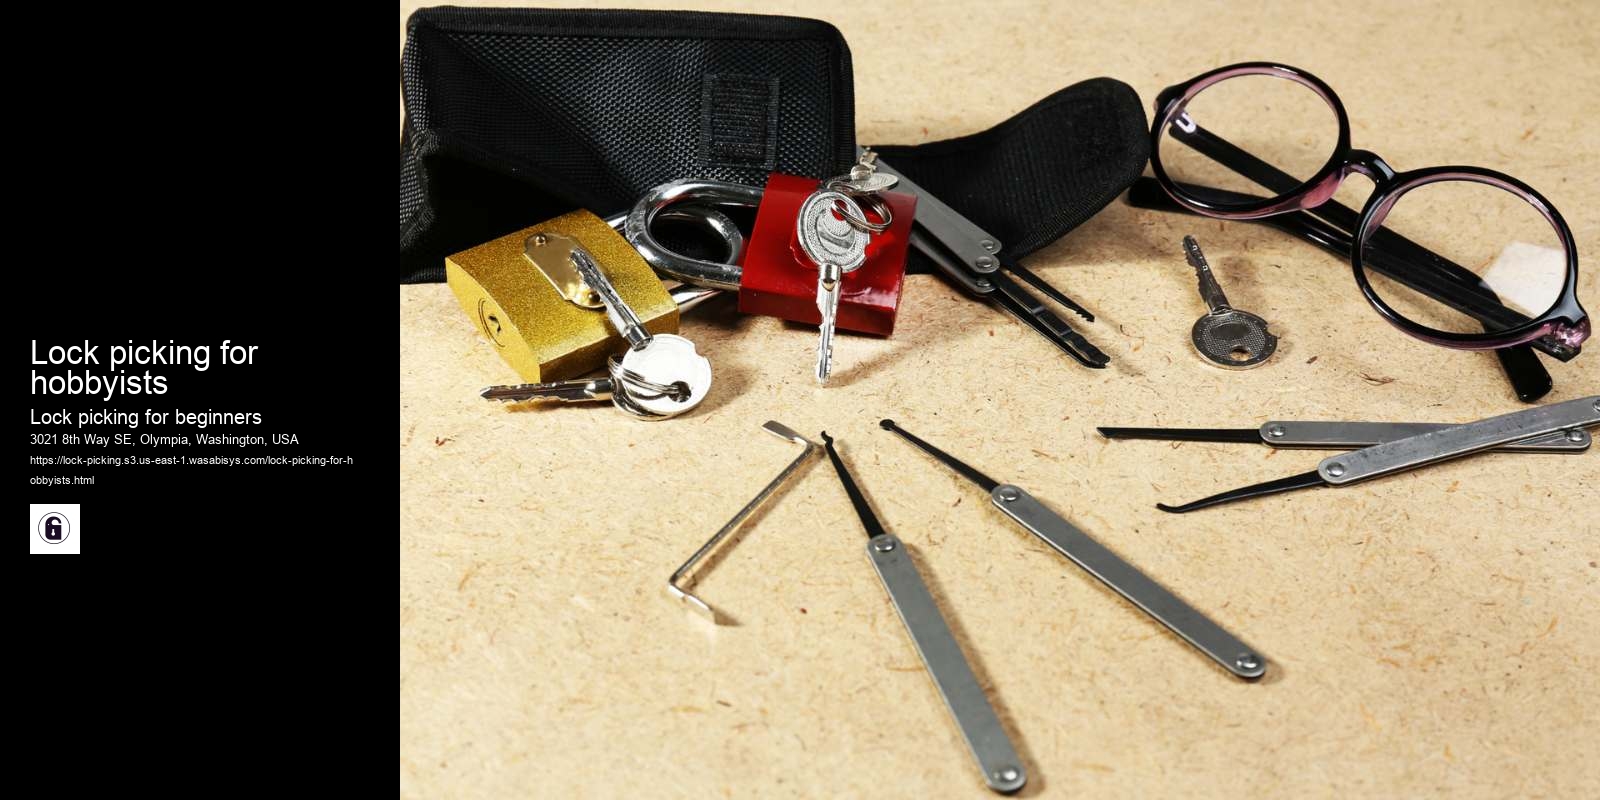 Lock picking for hobbyists